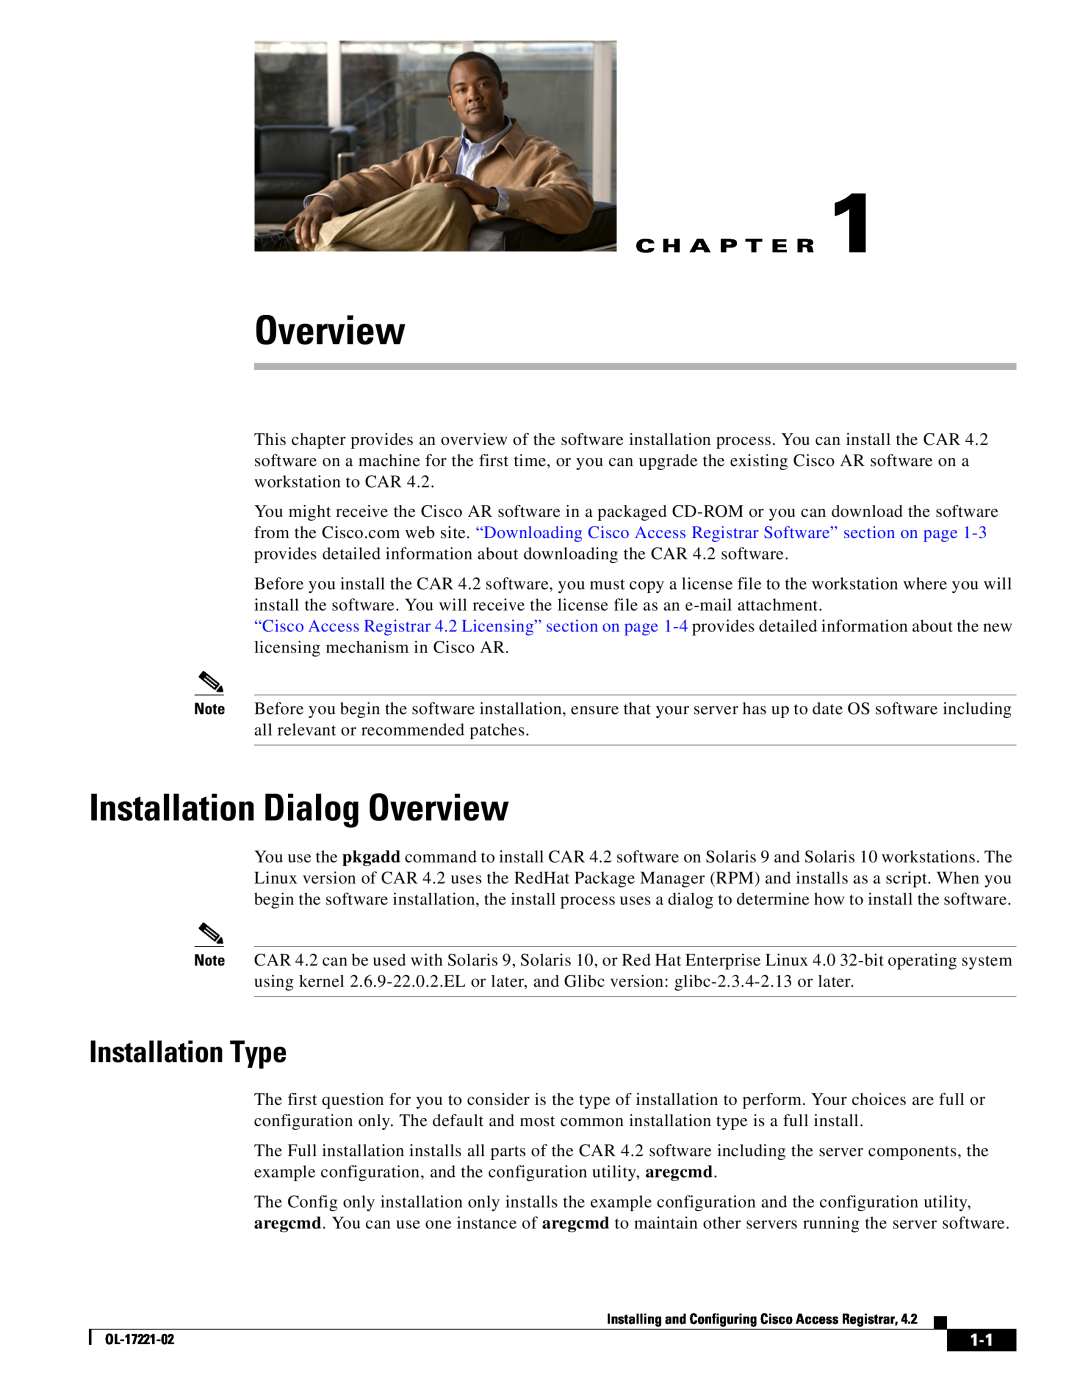 Cisco Systems 4.2 manual Installation Dialog Overview, Installation Type, C H A P T E R 